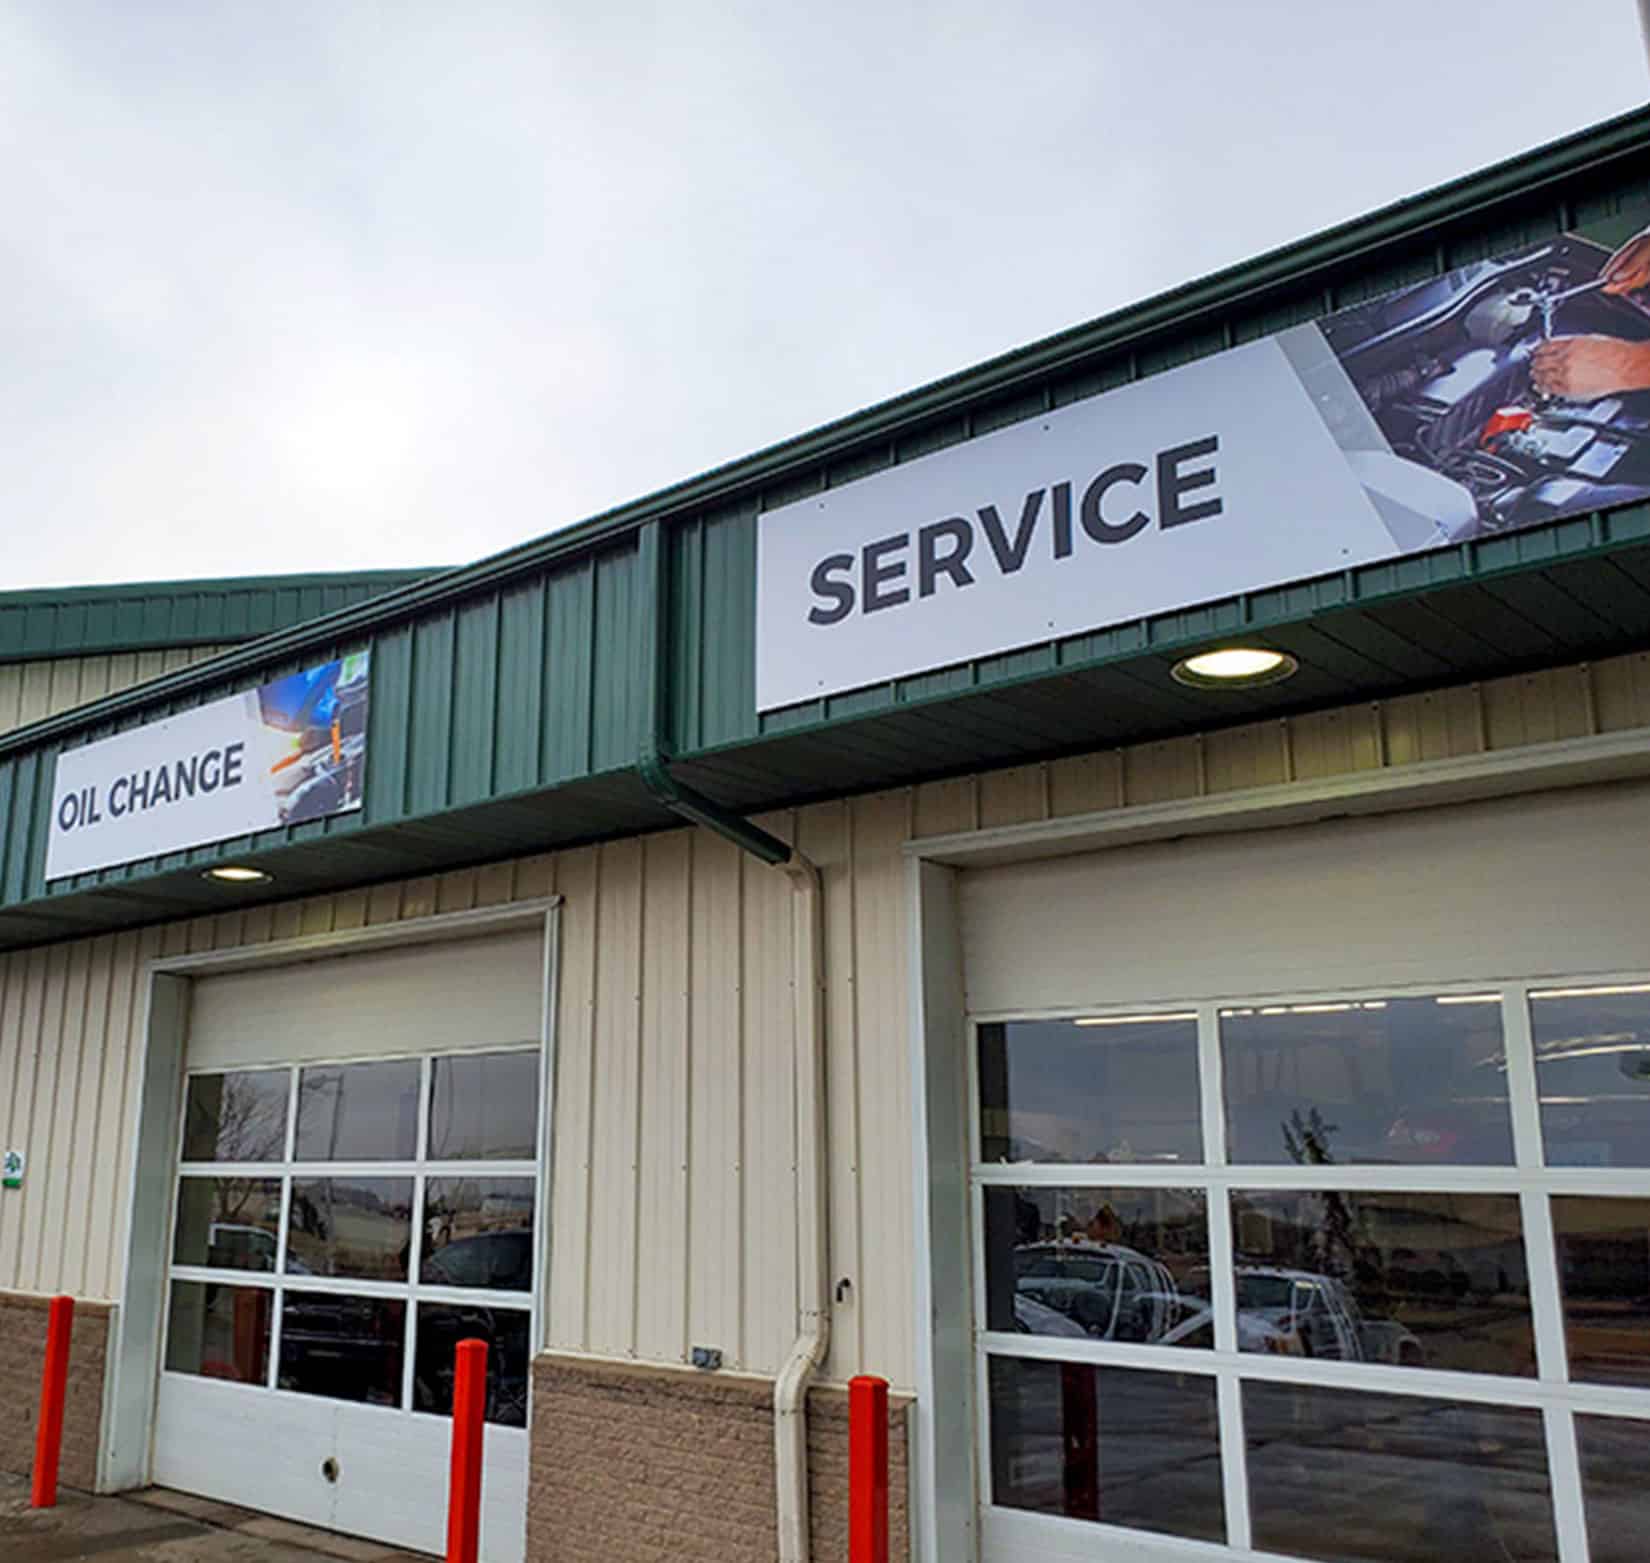 Signage outside the Dusterhoft Family Stores auto service department to designate the oil change and service areas.